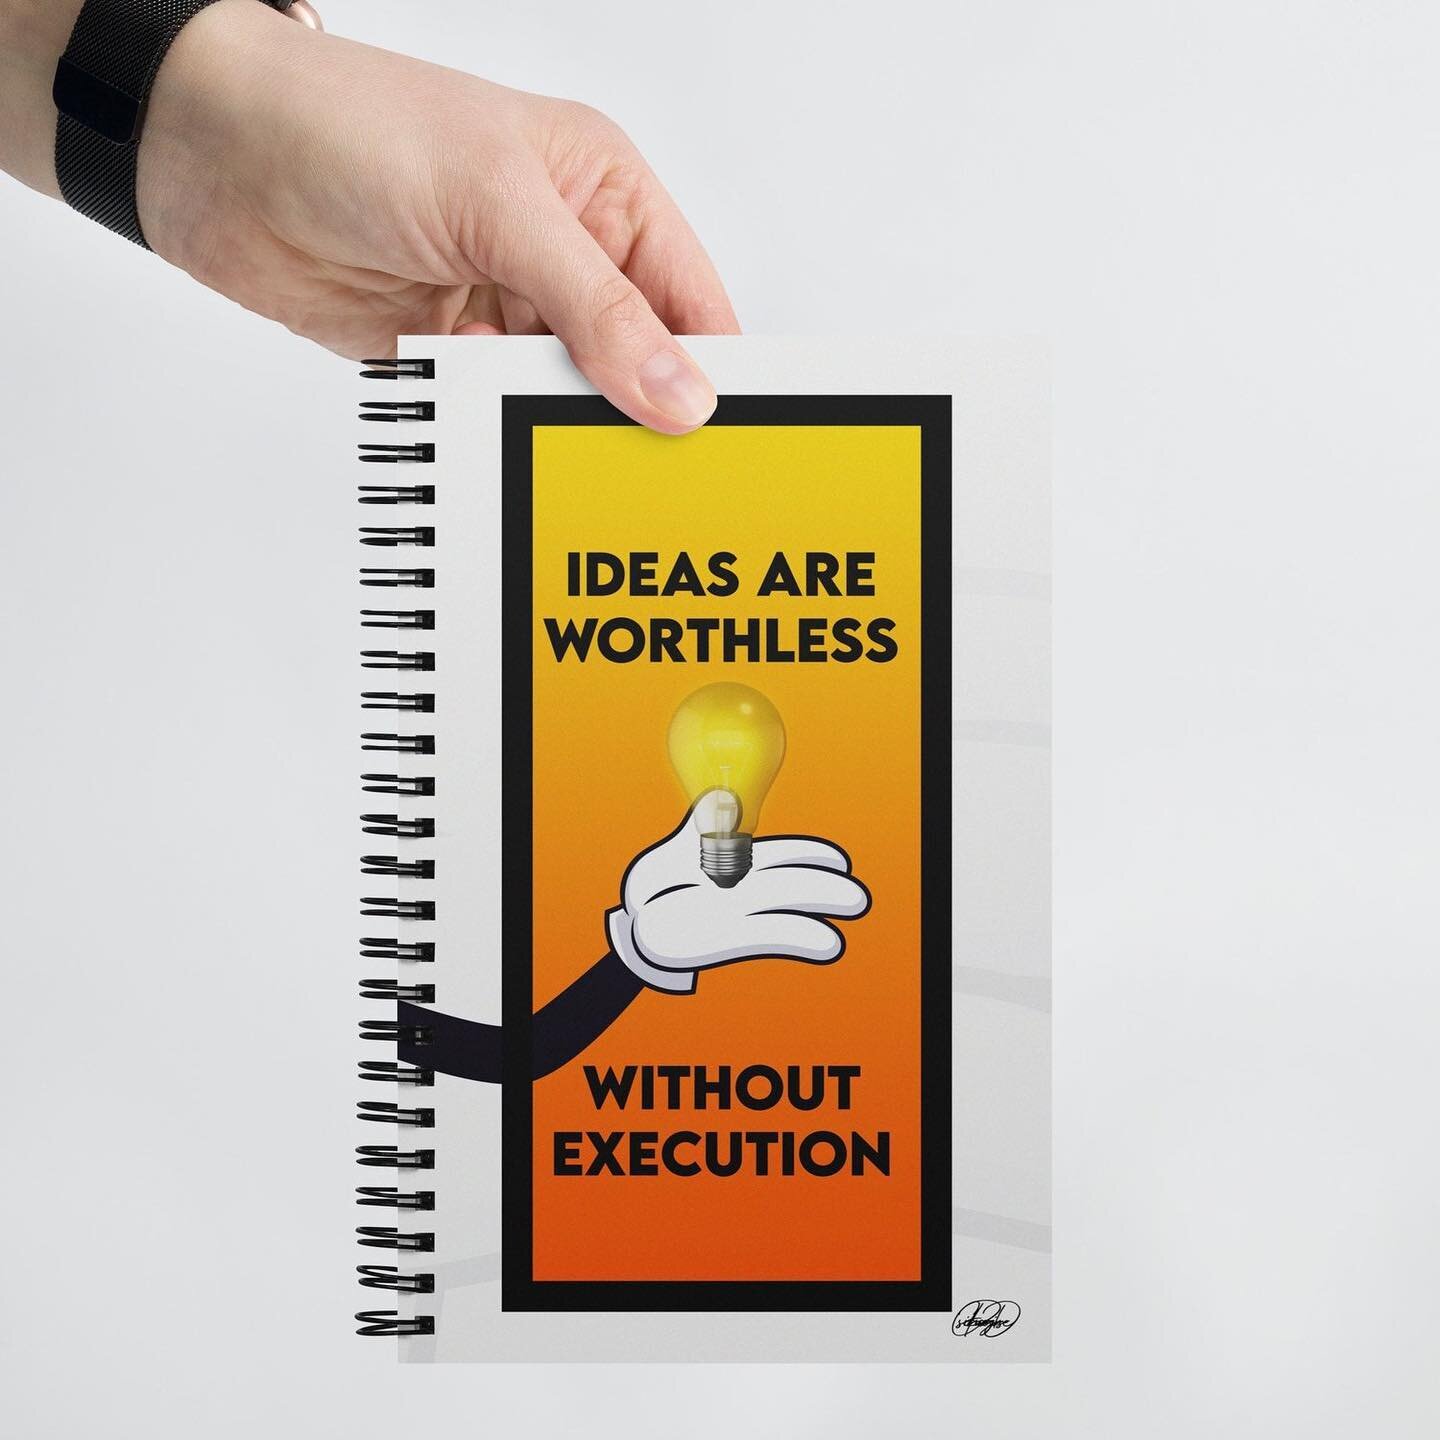 Got big ideas? Make them happen with our stylish notebook! 📓💡 

With a design that reminds you that ideas are worthless without execution, you'll stay motivated to take action and turn your dreams into reality. Whether you're a student, a creative 